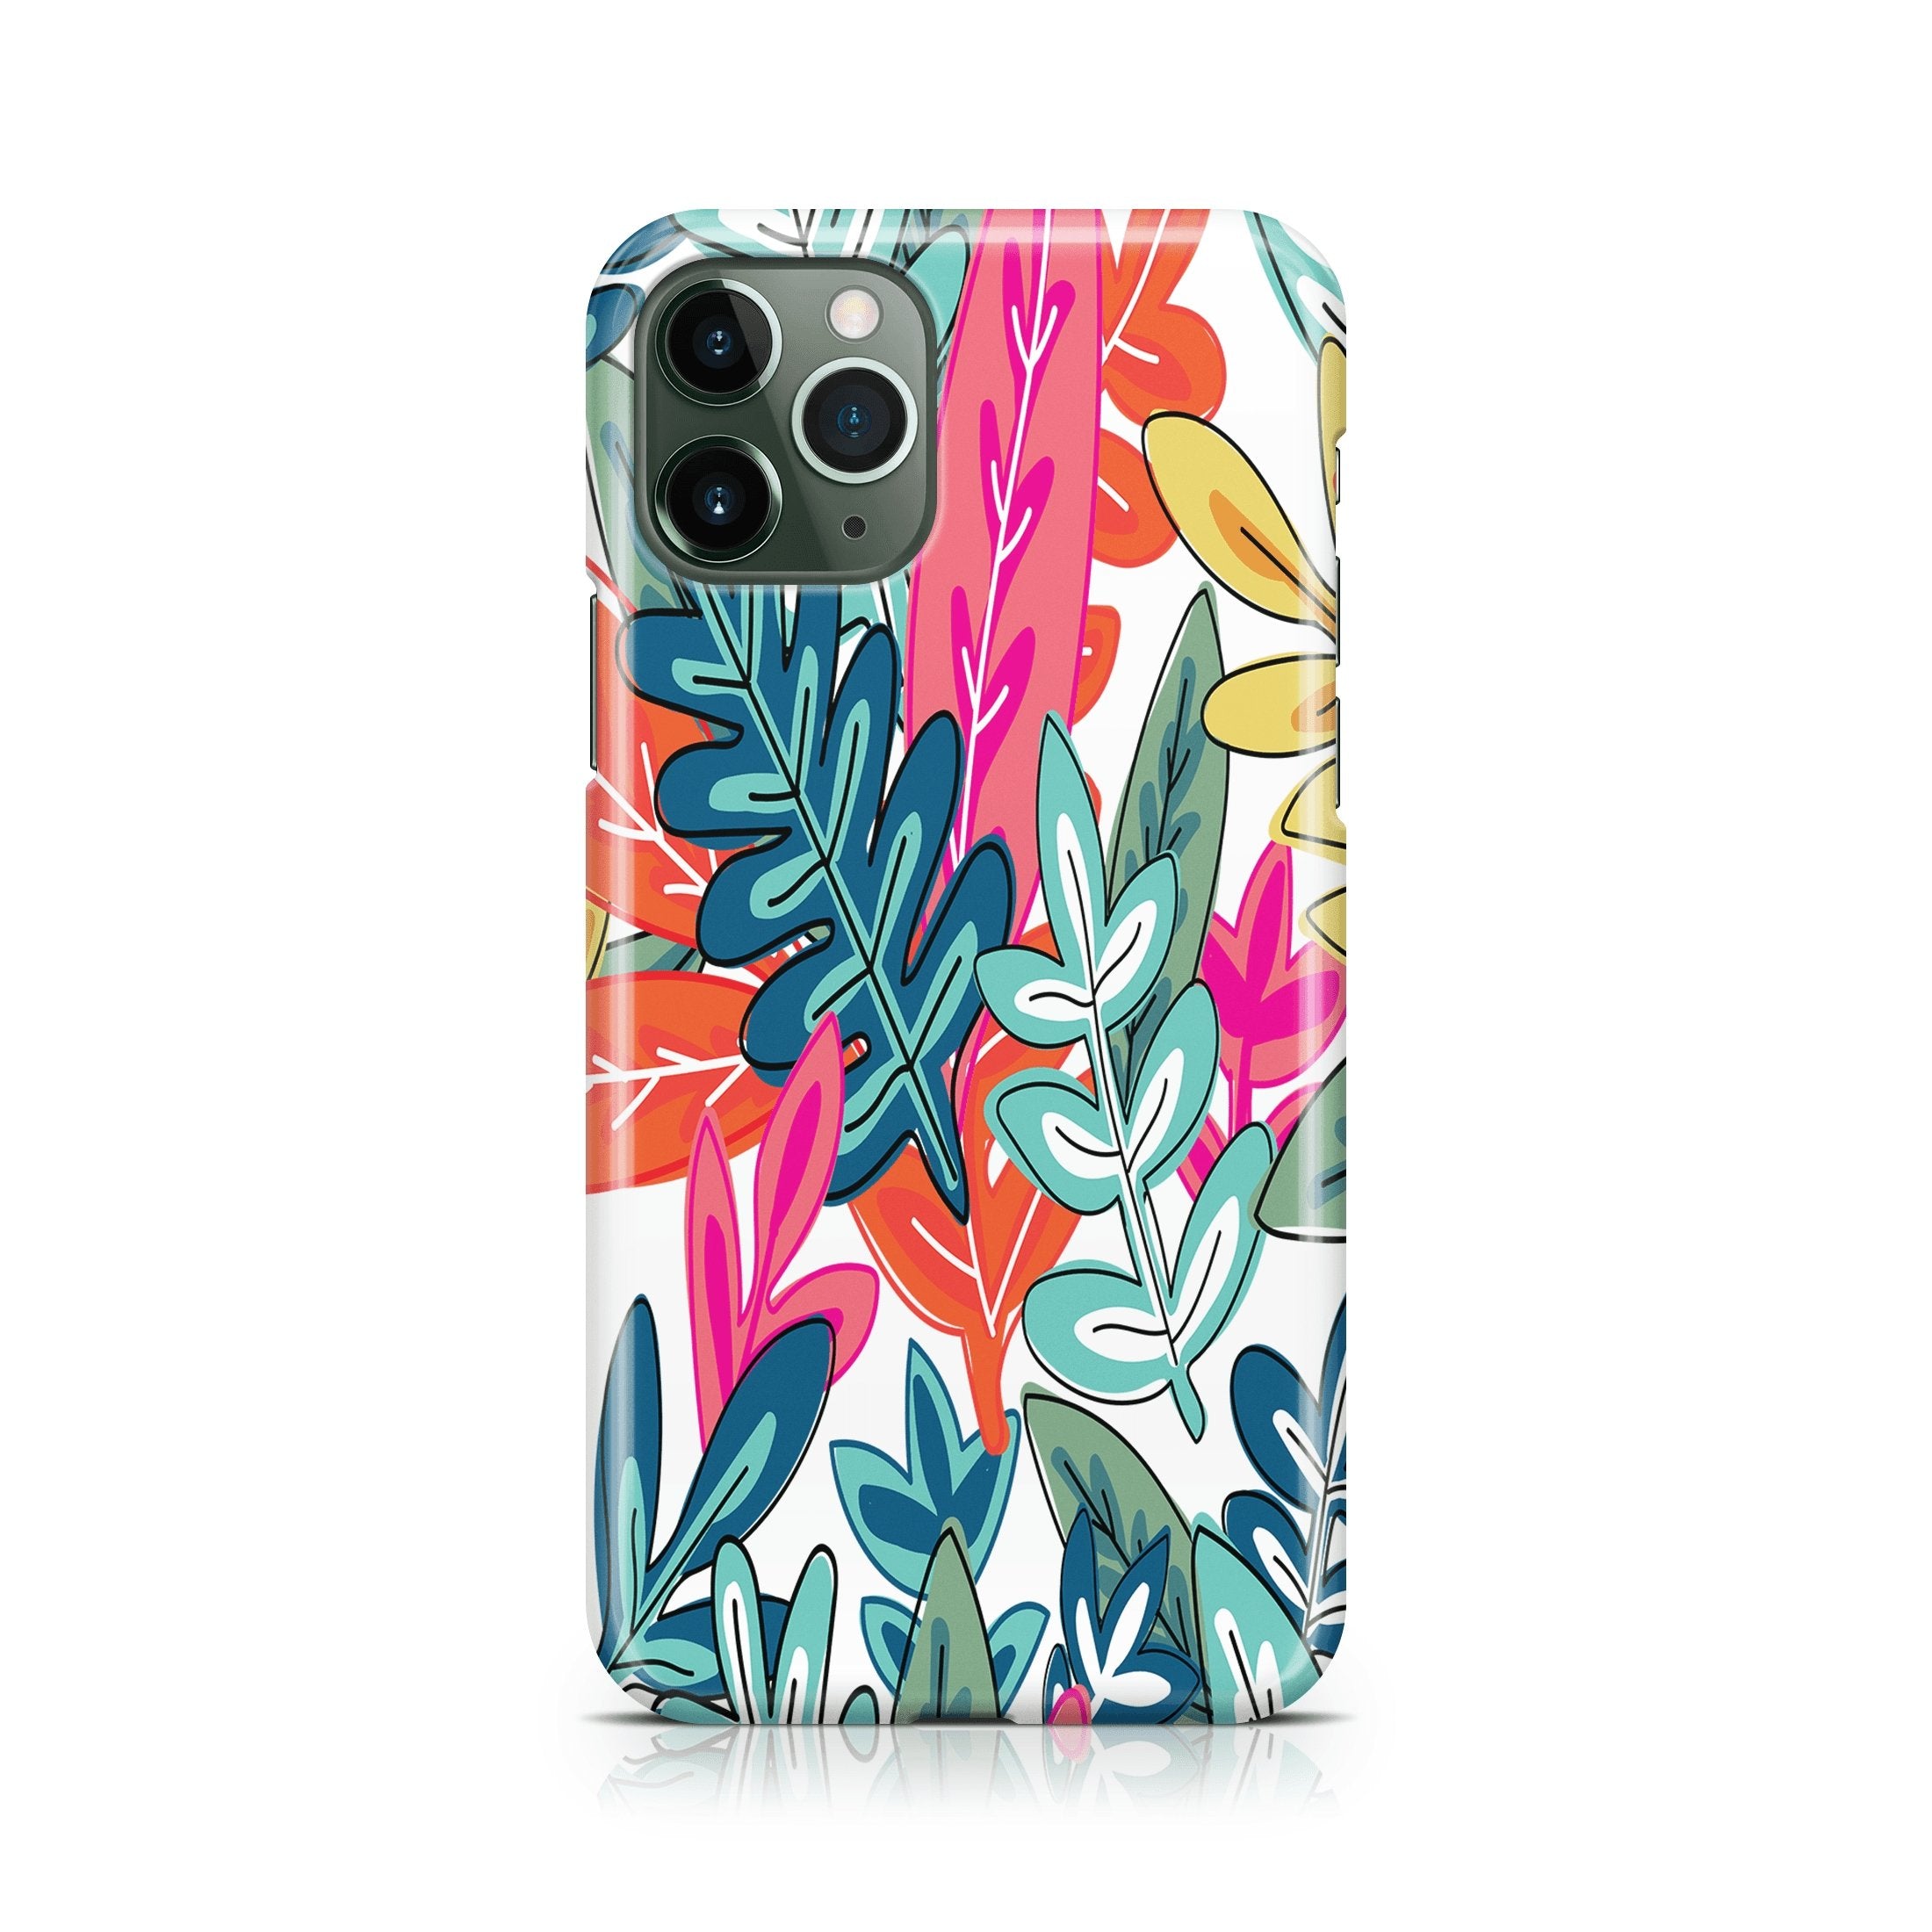 Urban Jungle - iPhone phone case designs by CaseSwagger